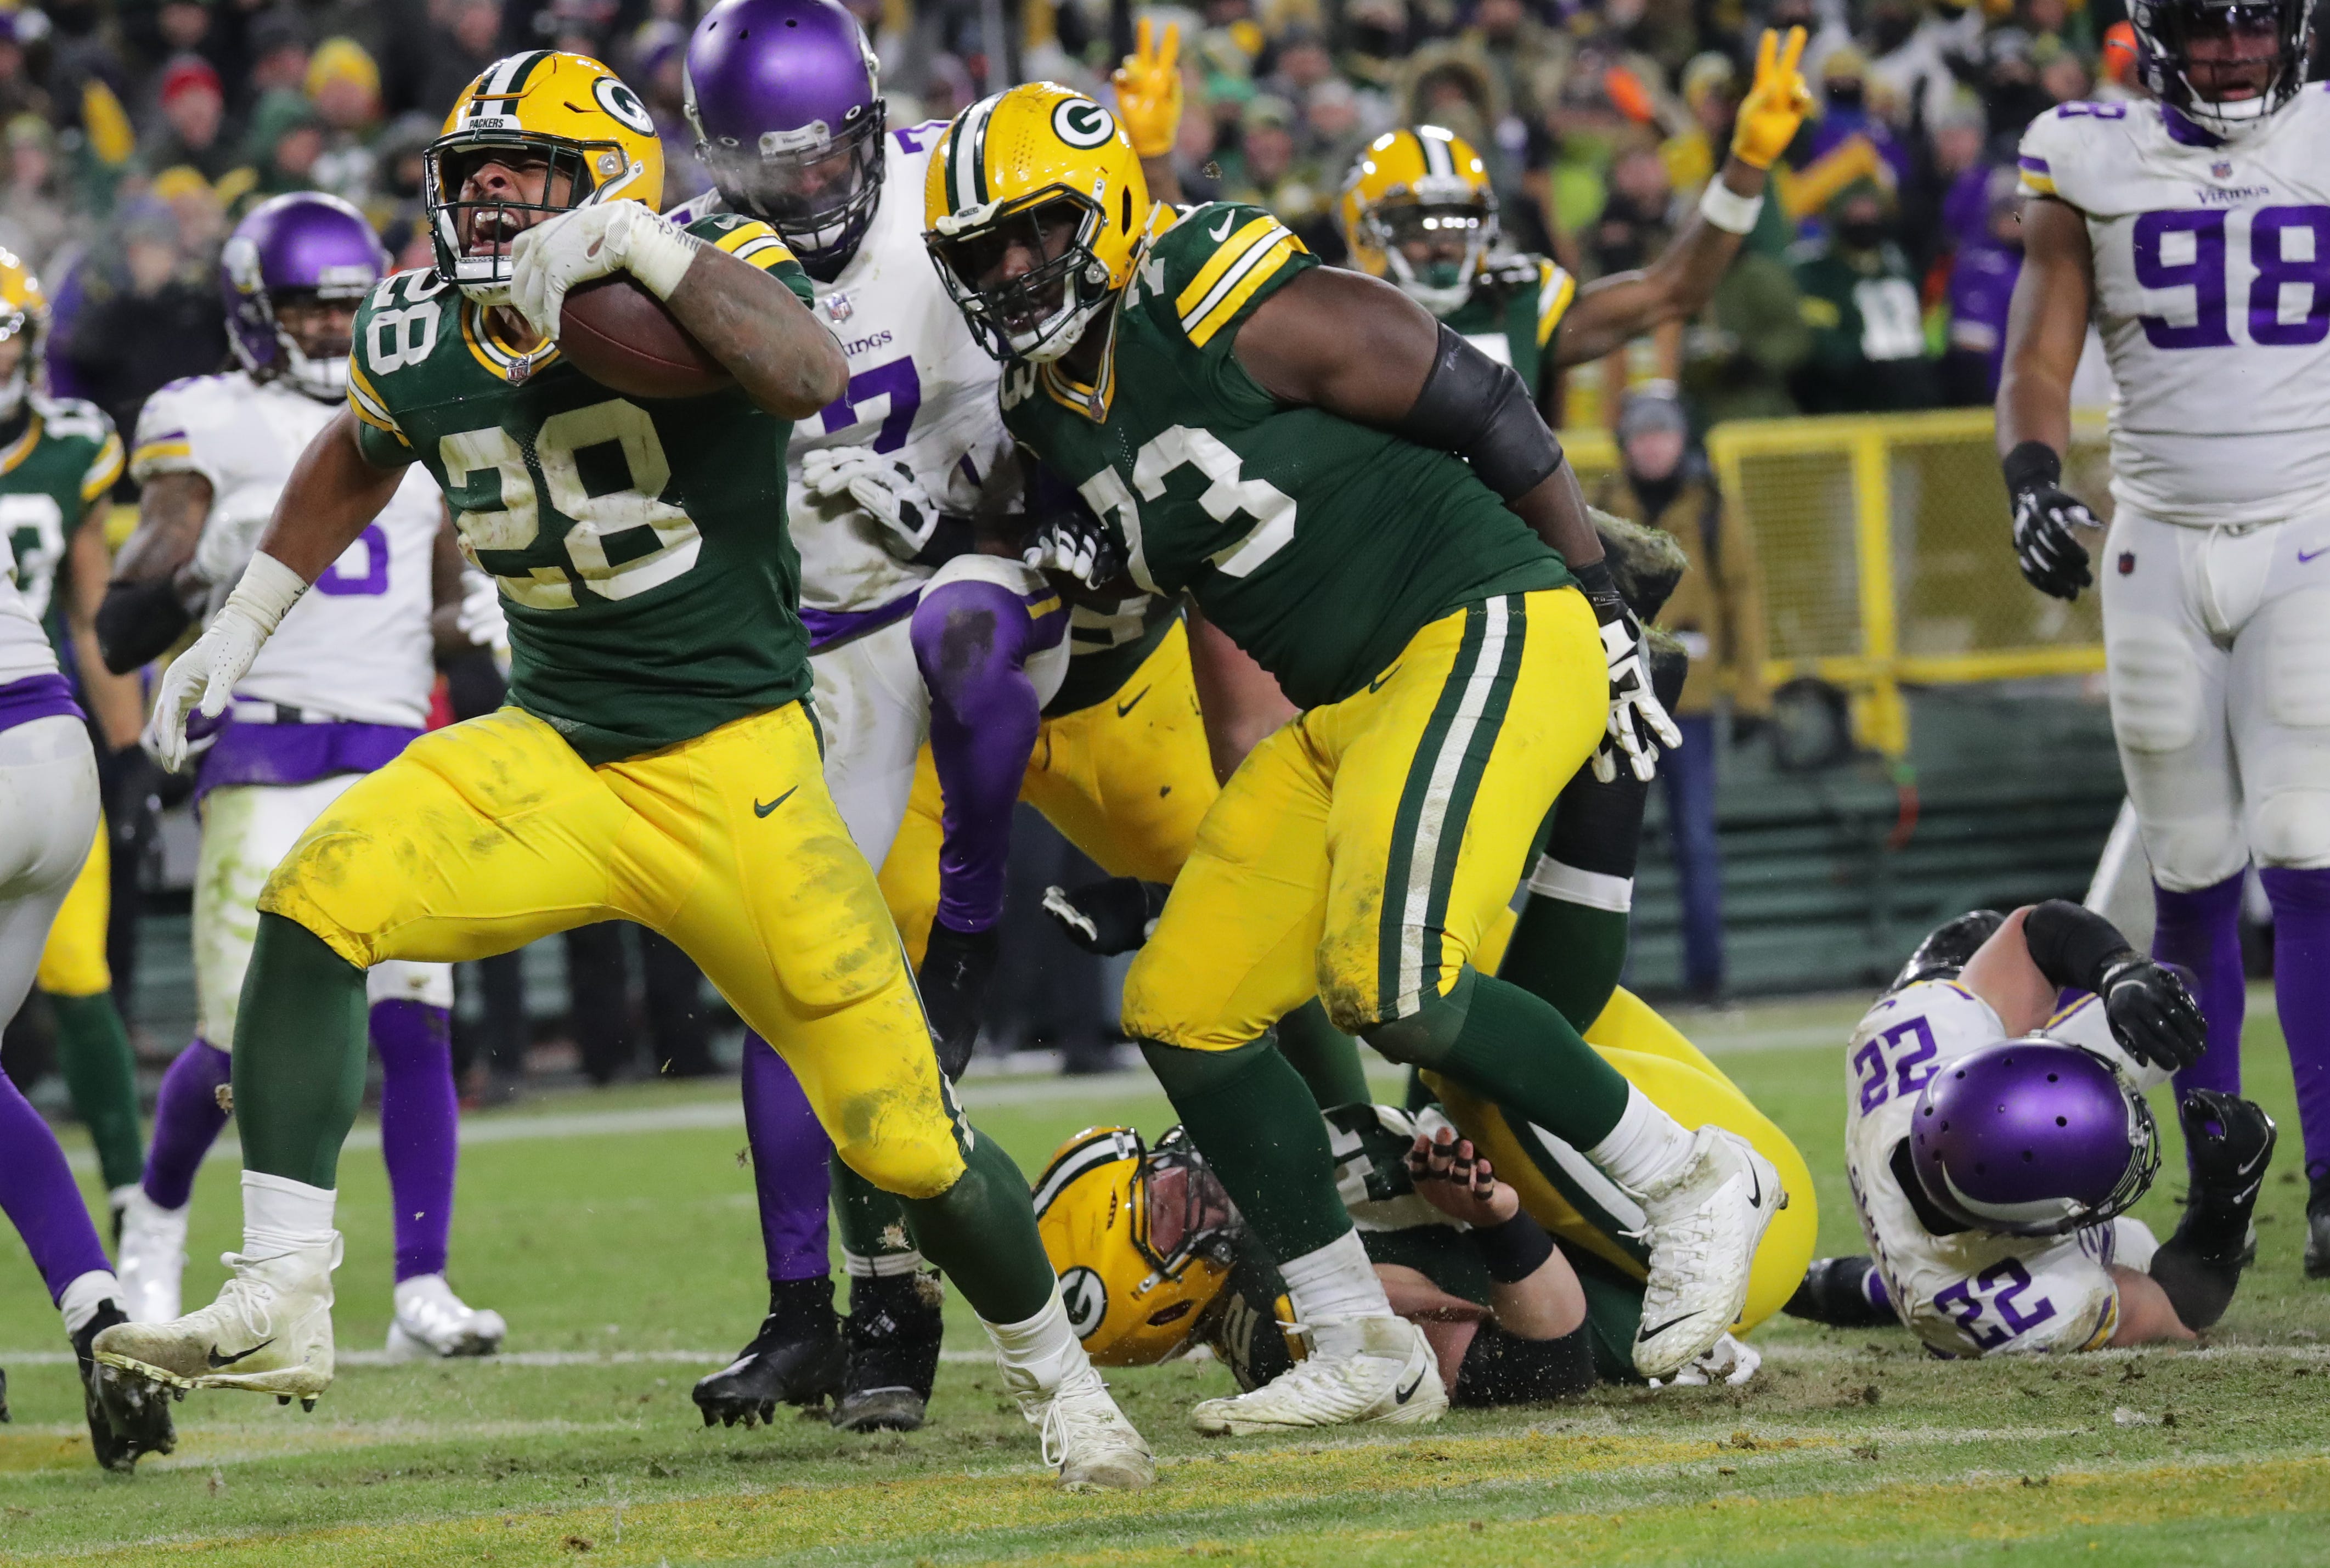 Green Bay Packers running back A.J. Dillon (28) scores touchdown during the the fourth quarter of their game Sunday, January 2, 2022 at Lambeau Field in Green Bay, Wis. The Green Bay Packers beat the Minnesota Vikings 37-10 to clinch a first round playoff bye.